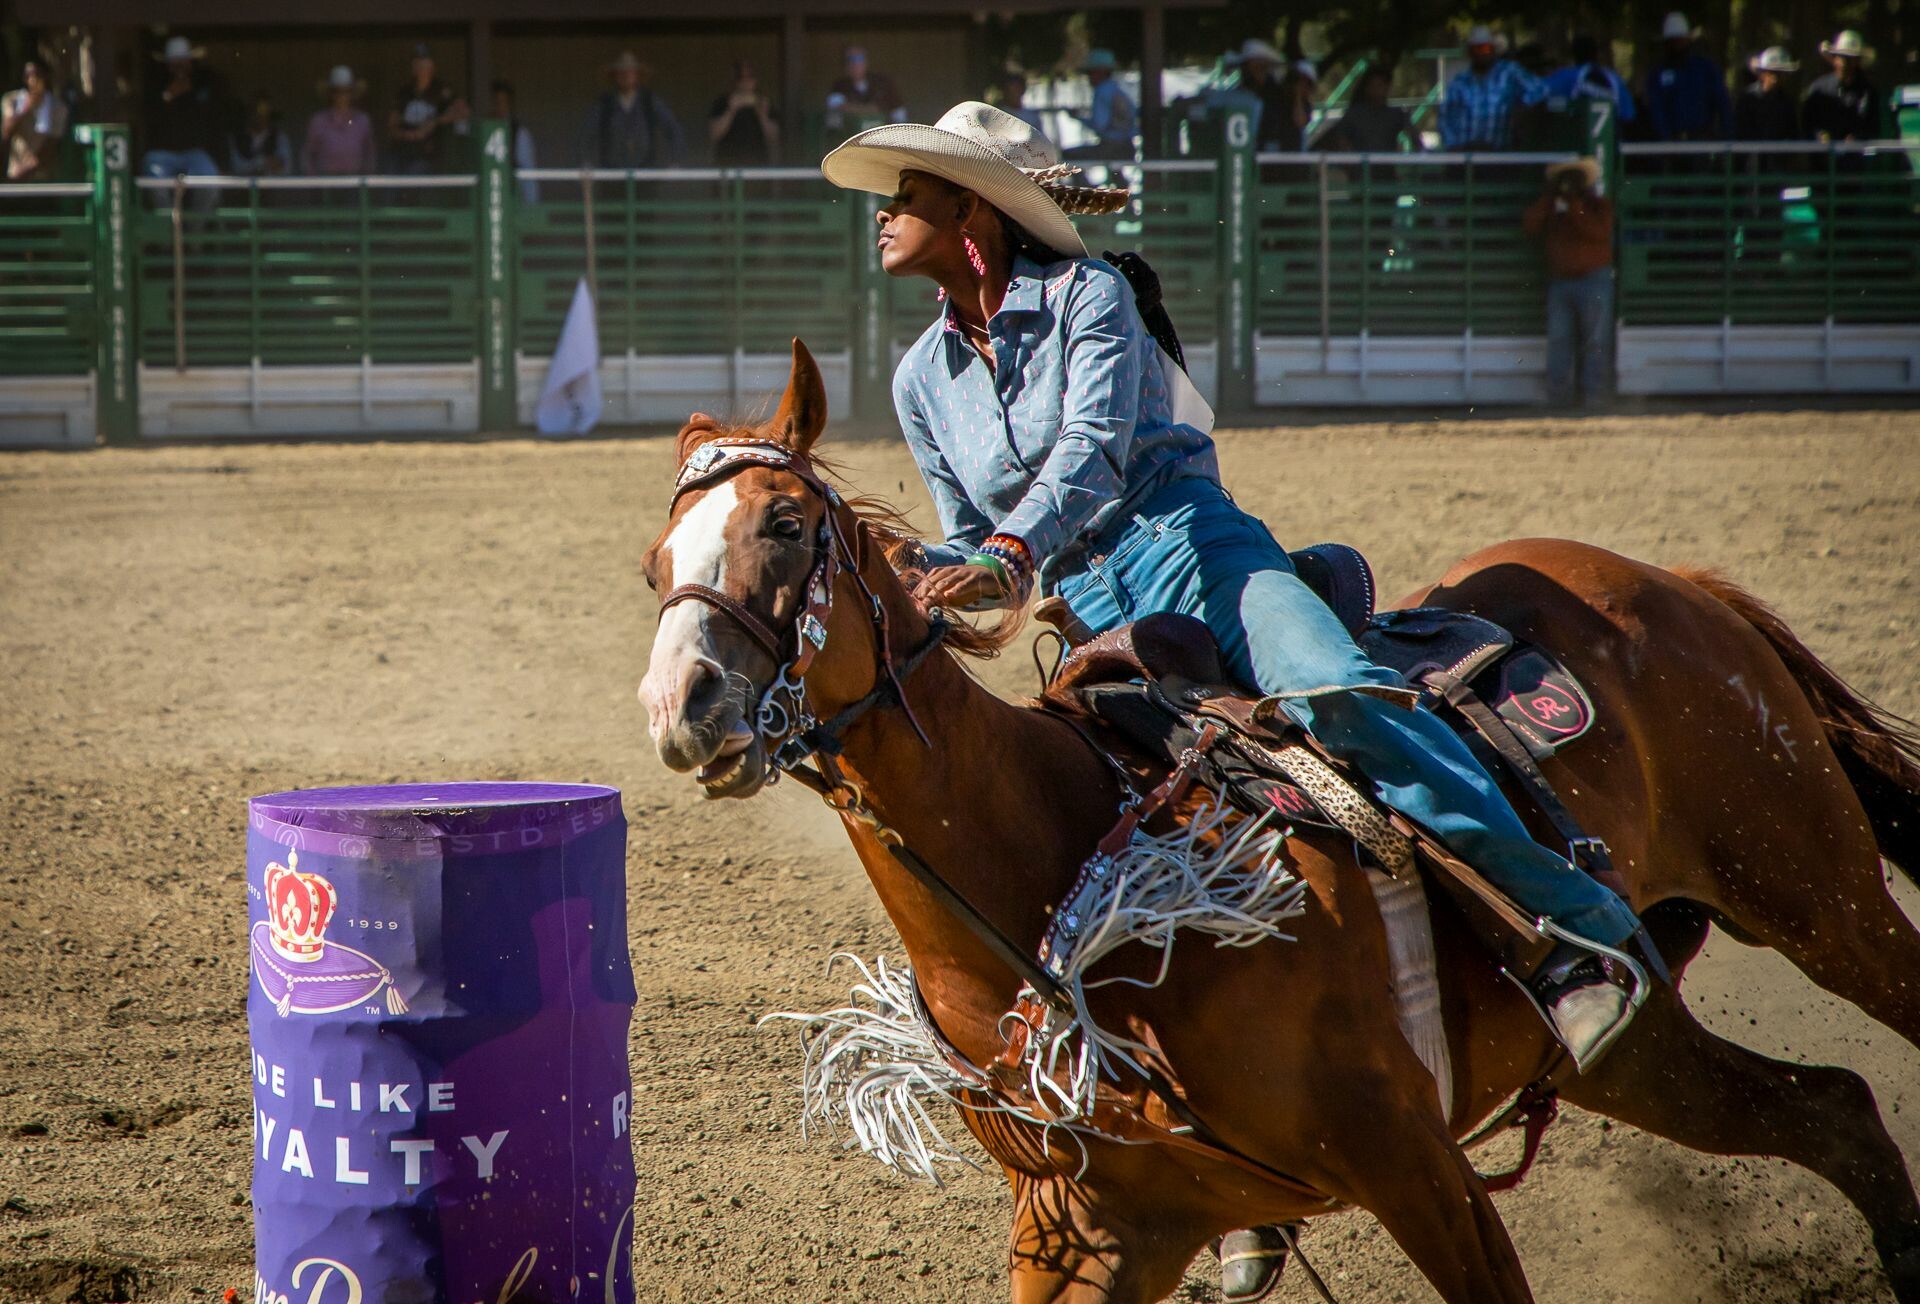 A Black woman wearing double denim rides a tan horse in a sandy arena watched by a crowd. They are photographed leaning forward and to the side as both horse and rider pivot around a purple painted drum.